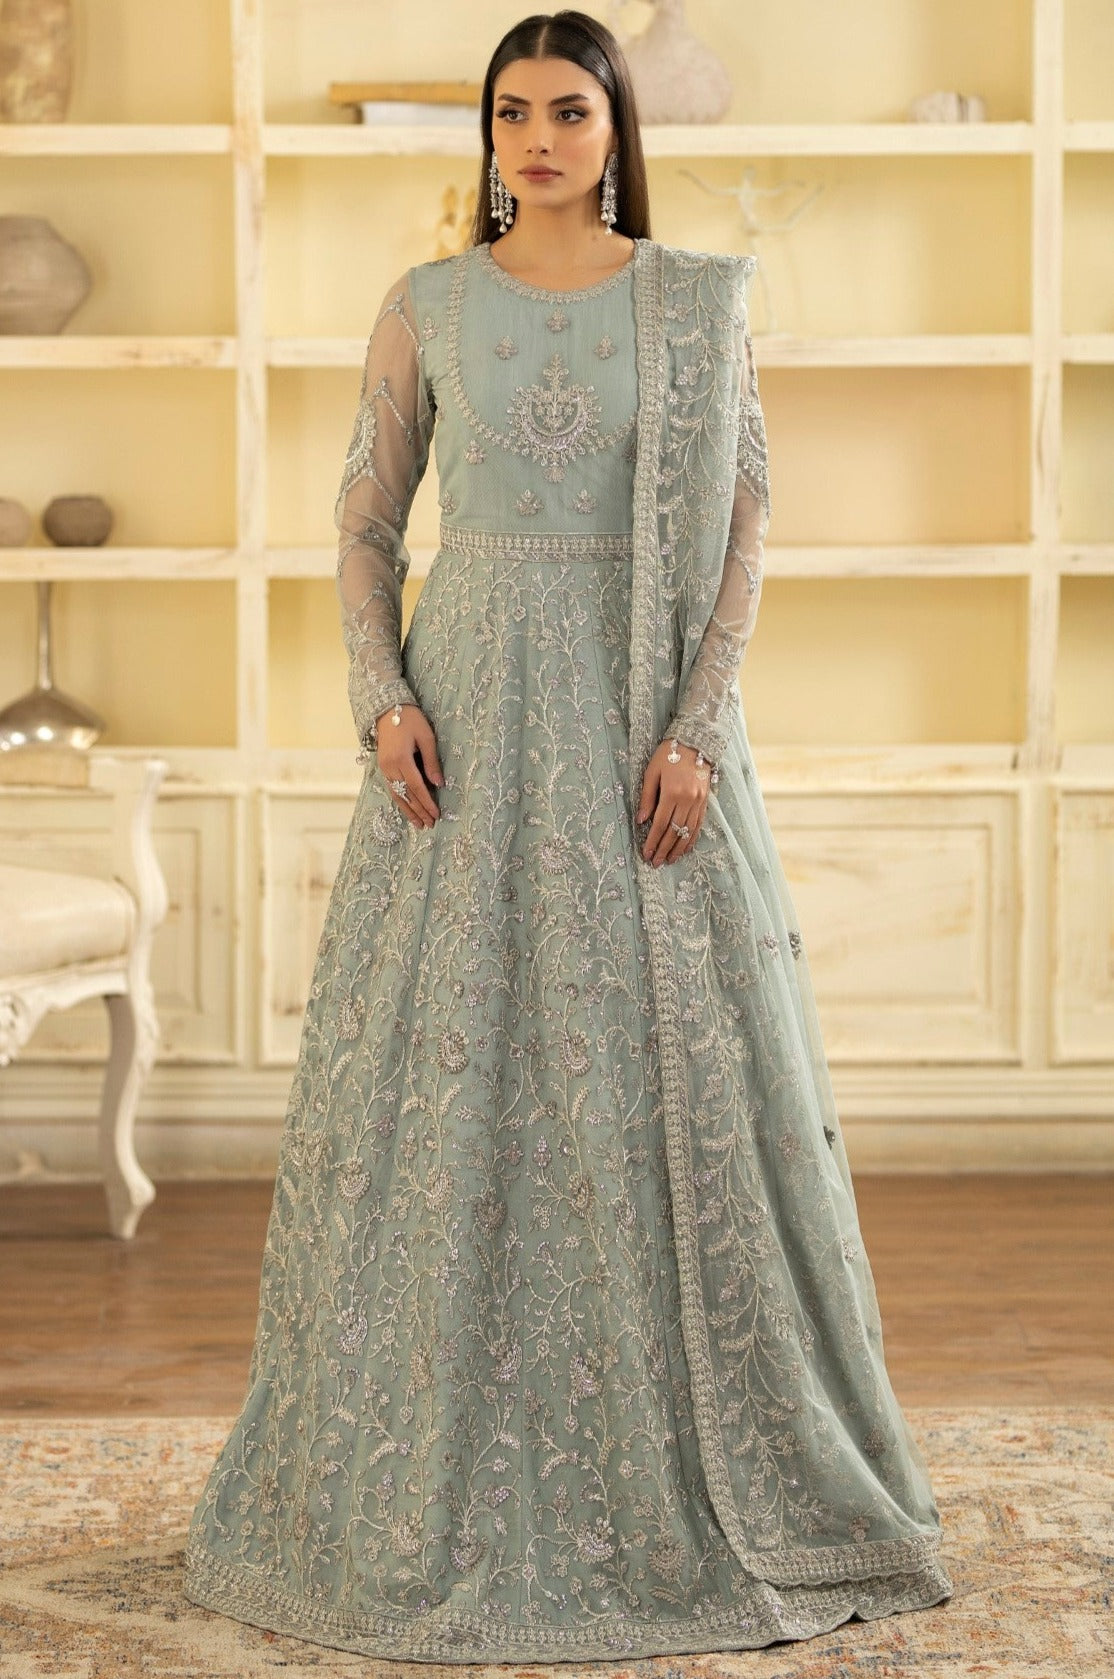 Buy Embroidered Chiffon Dresses For Women Online In Pakistan – Mohagni